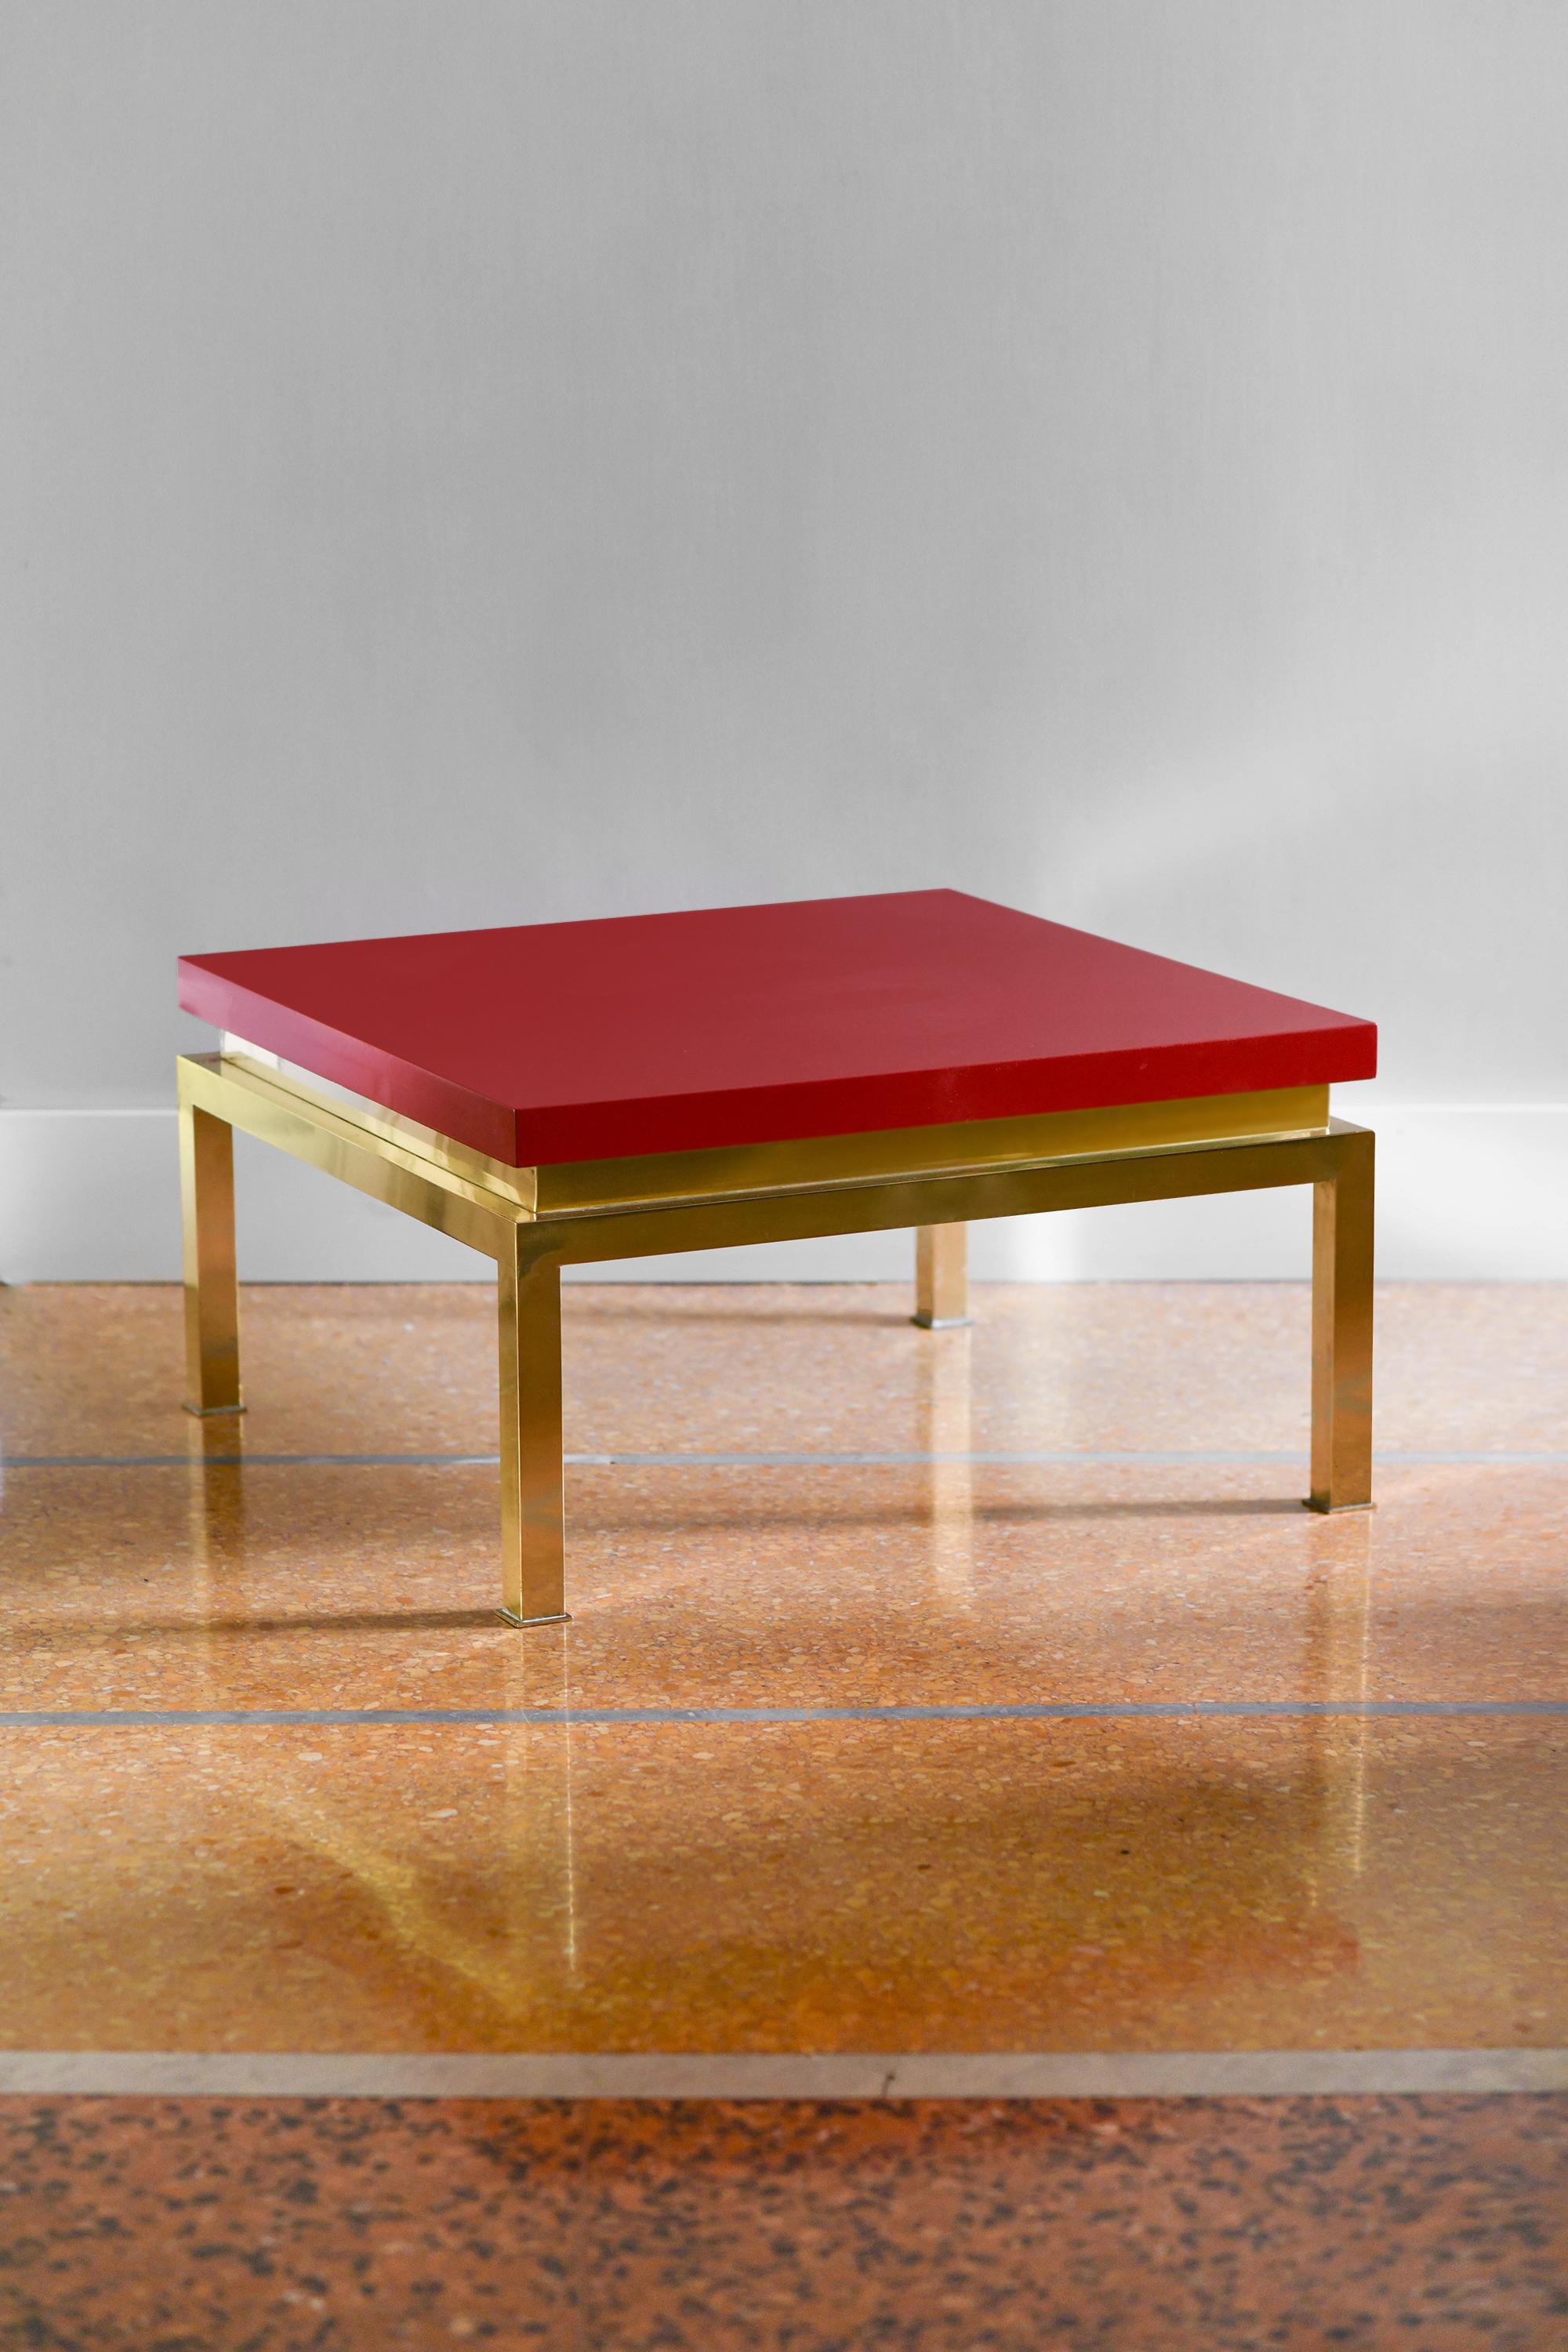 China red lacquered coffee table with brass structure, Italy 1980.
Product details
Dimensions 81 L x 43 H x 81 D cm
Designer: Serge Torrean
Production: Tommaso Barbi, Italy, 1980